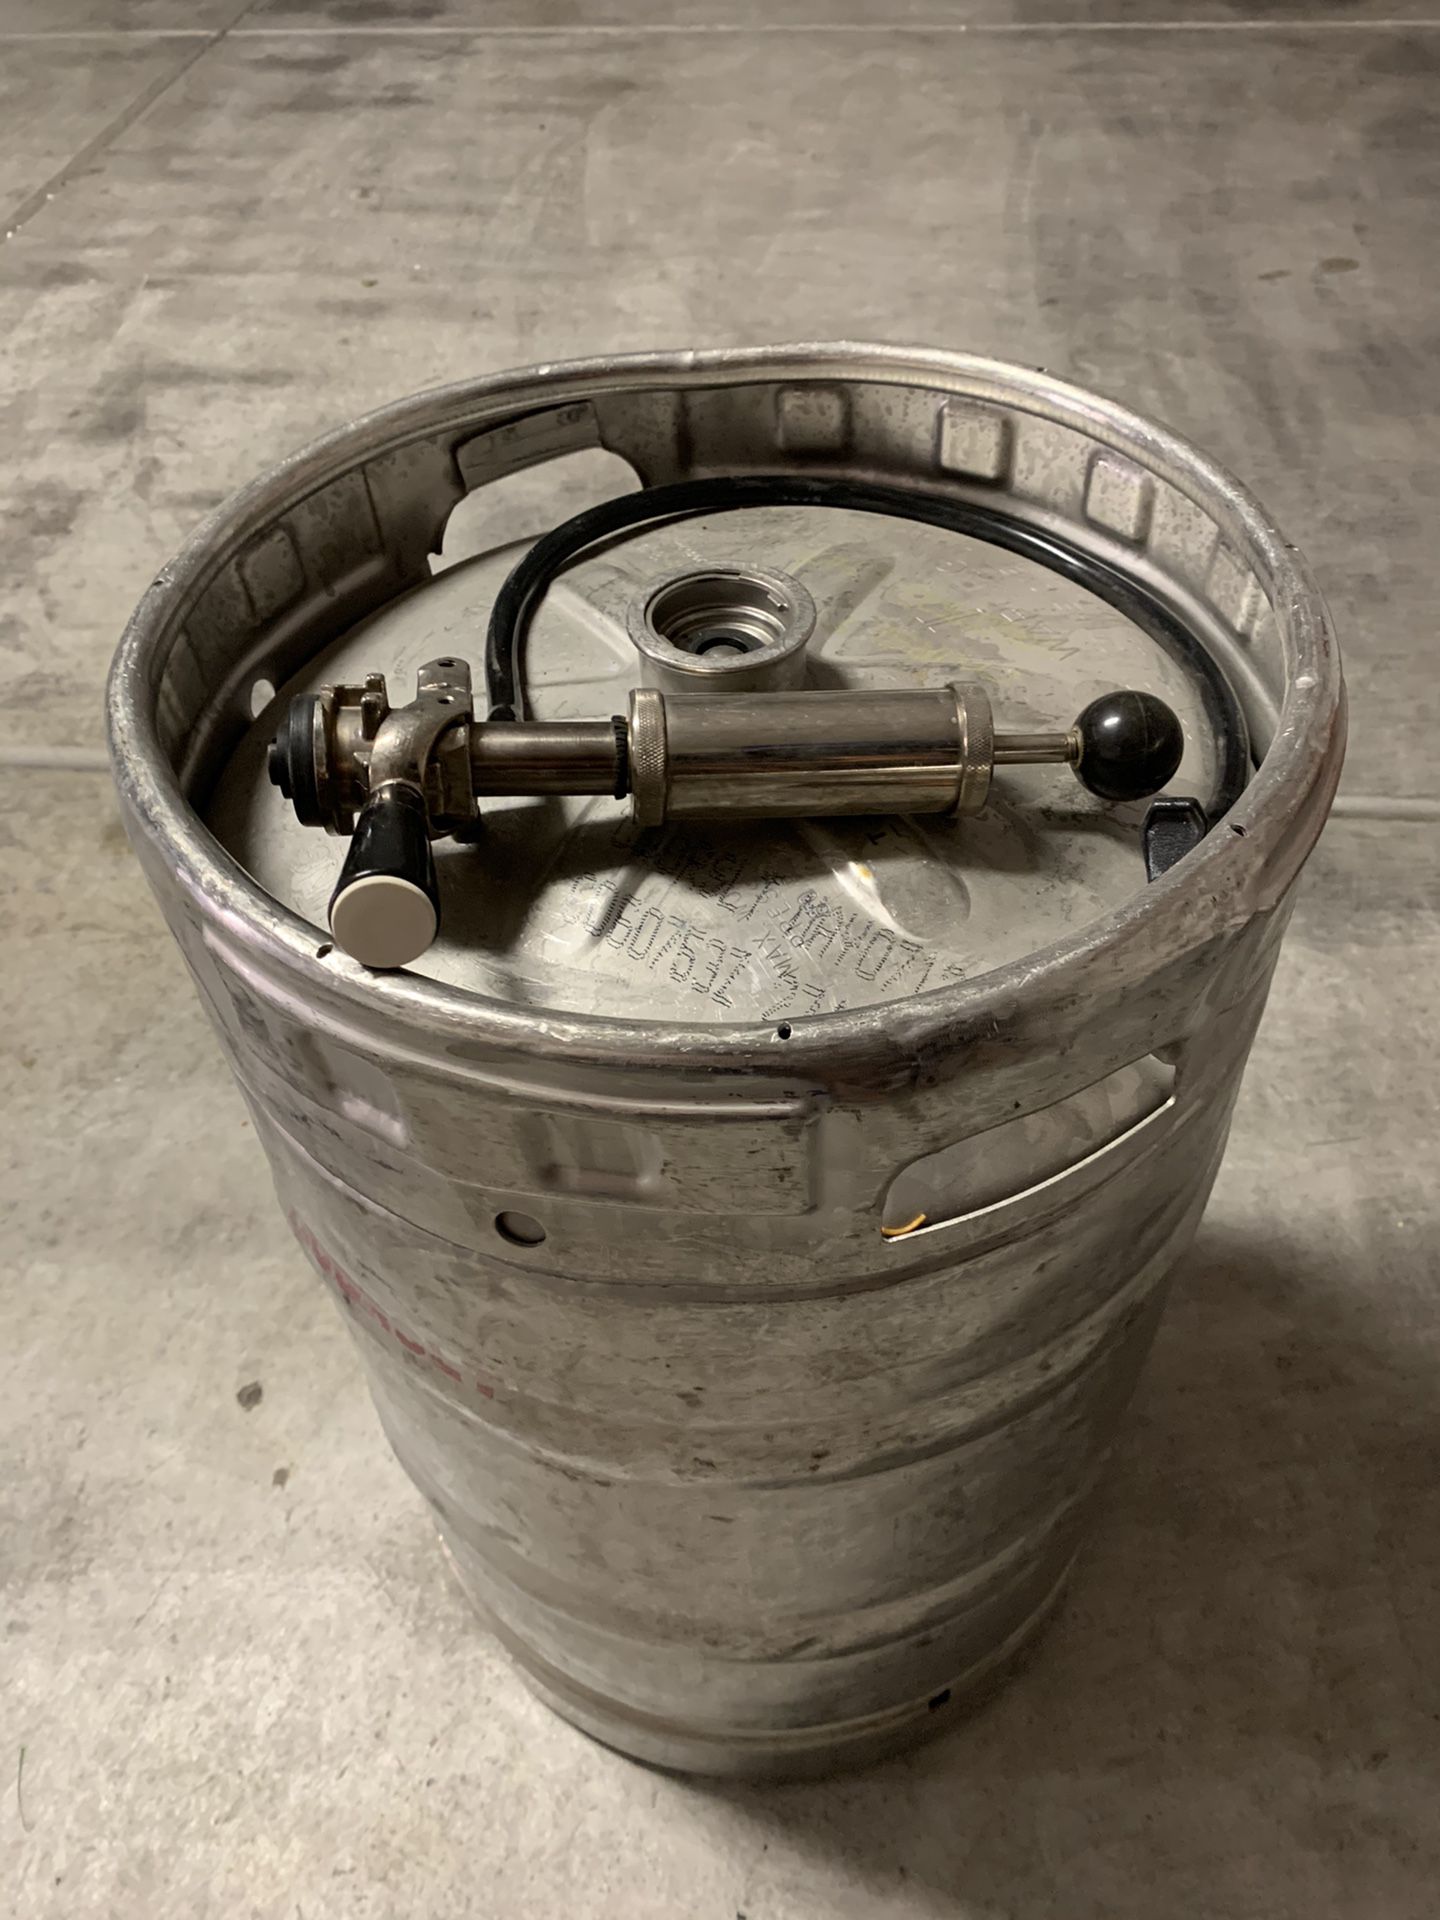 Keg and tap